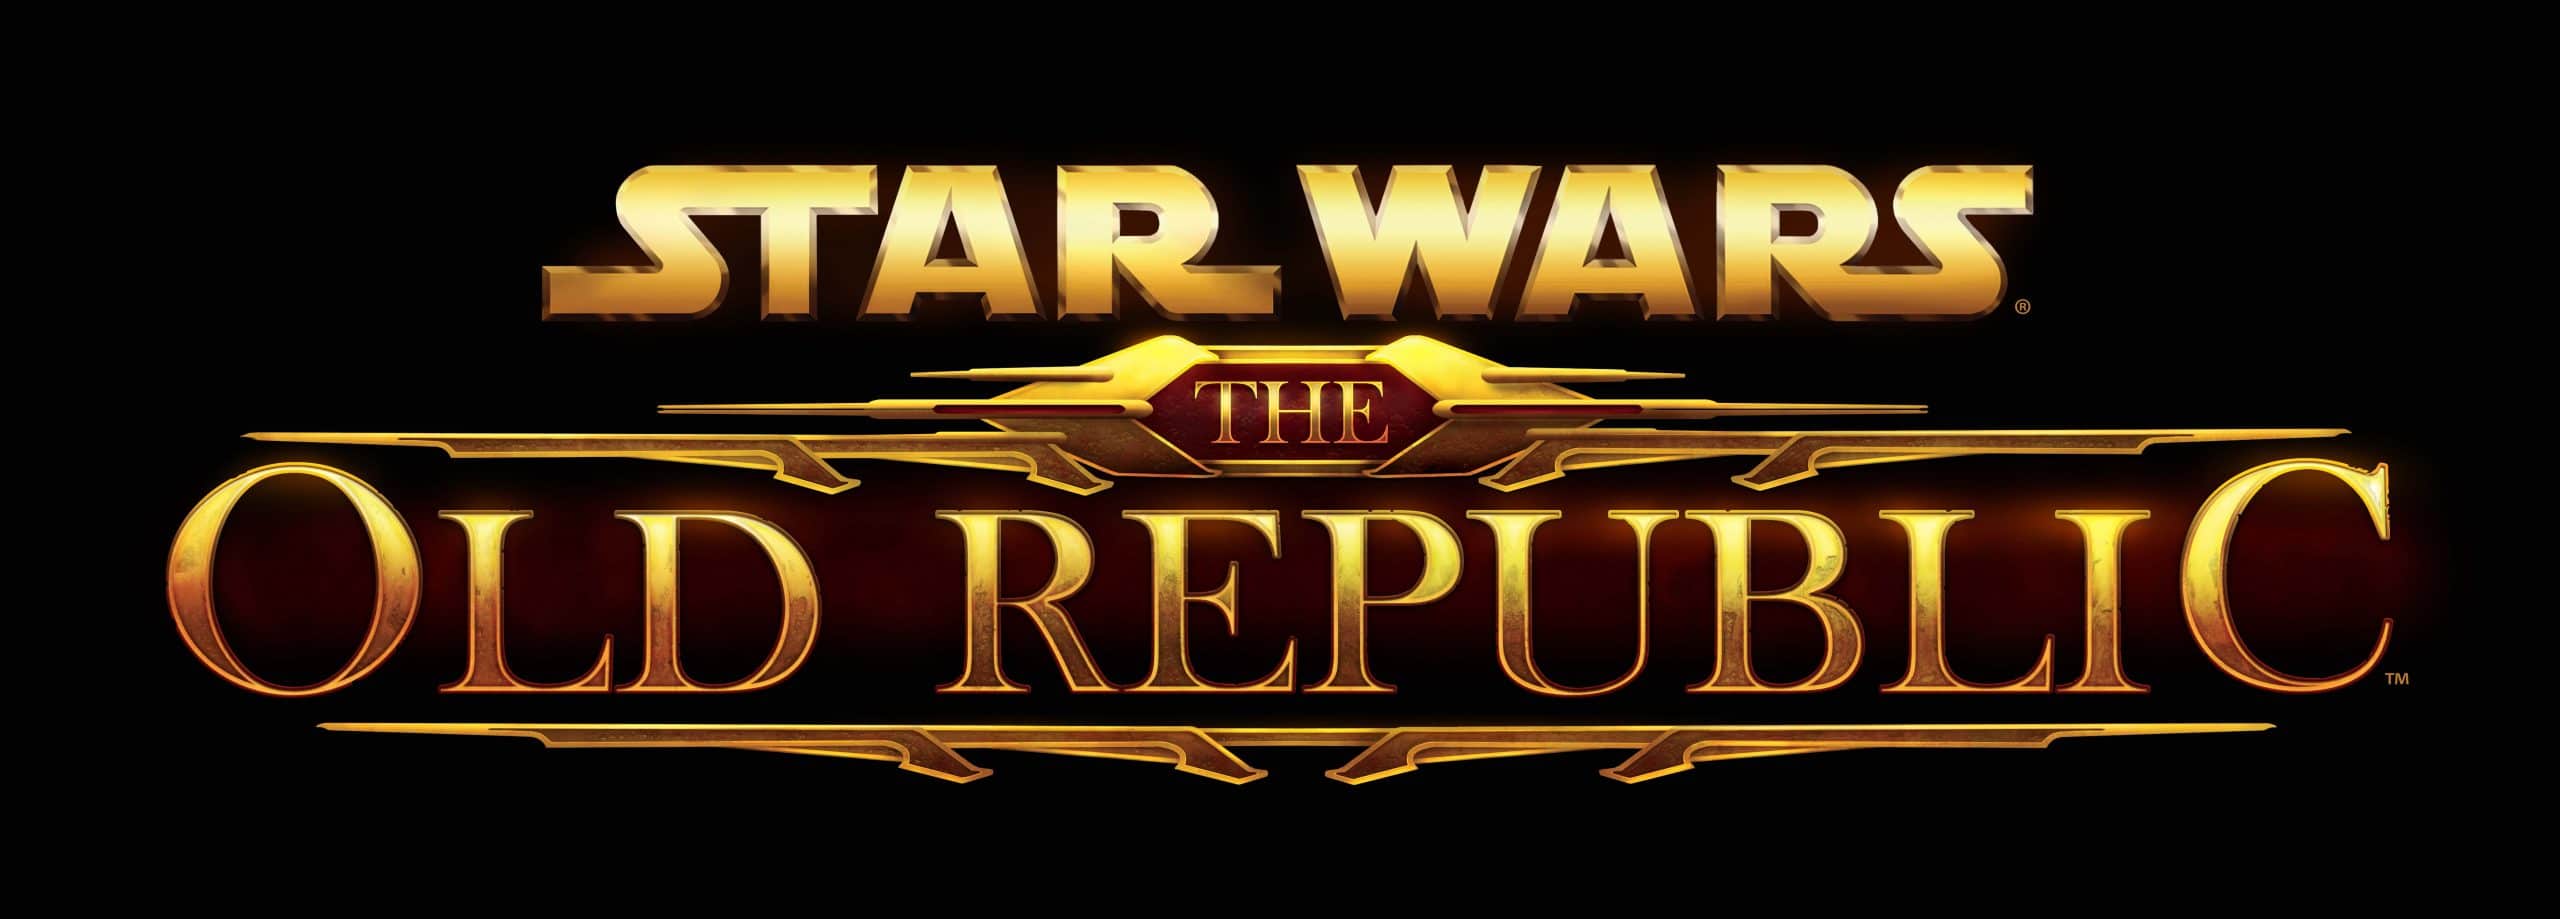 SWTOR Gets Technical – A Look at the New Systems Coming in 5.10.2